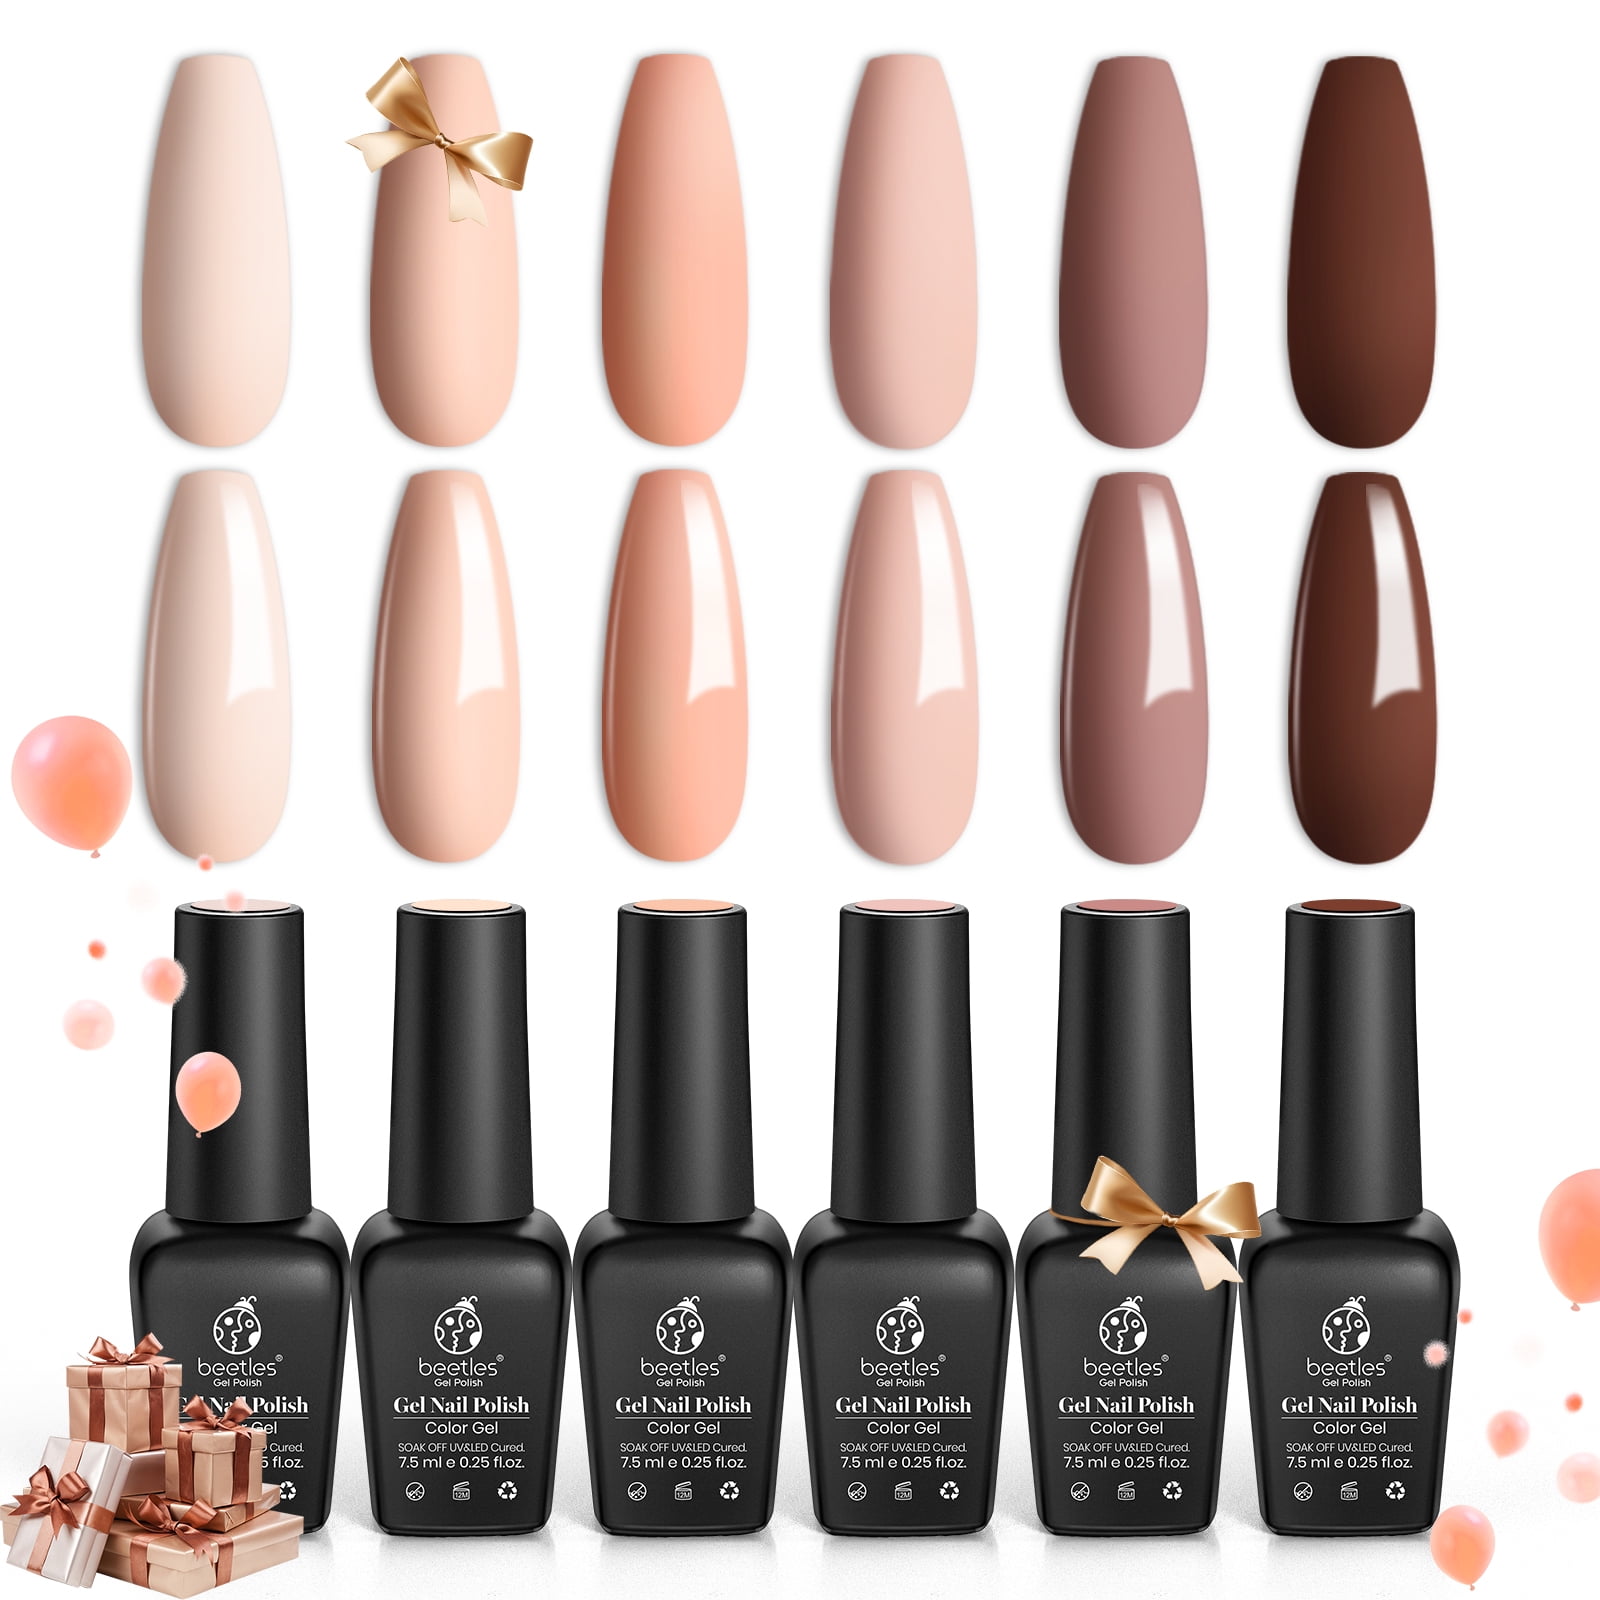 The 20 Best Neutral Nail Colors for All Skin Tones | Who What Wear